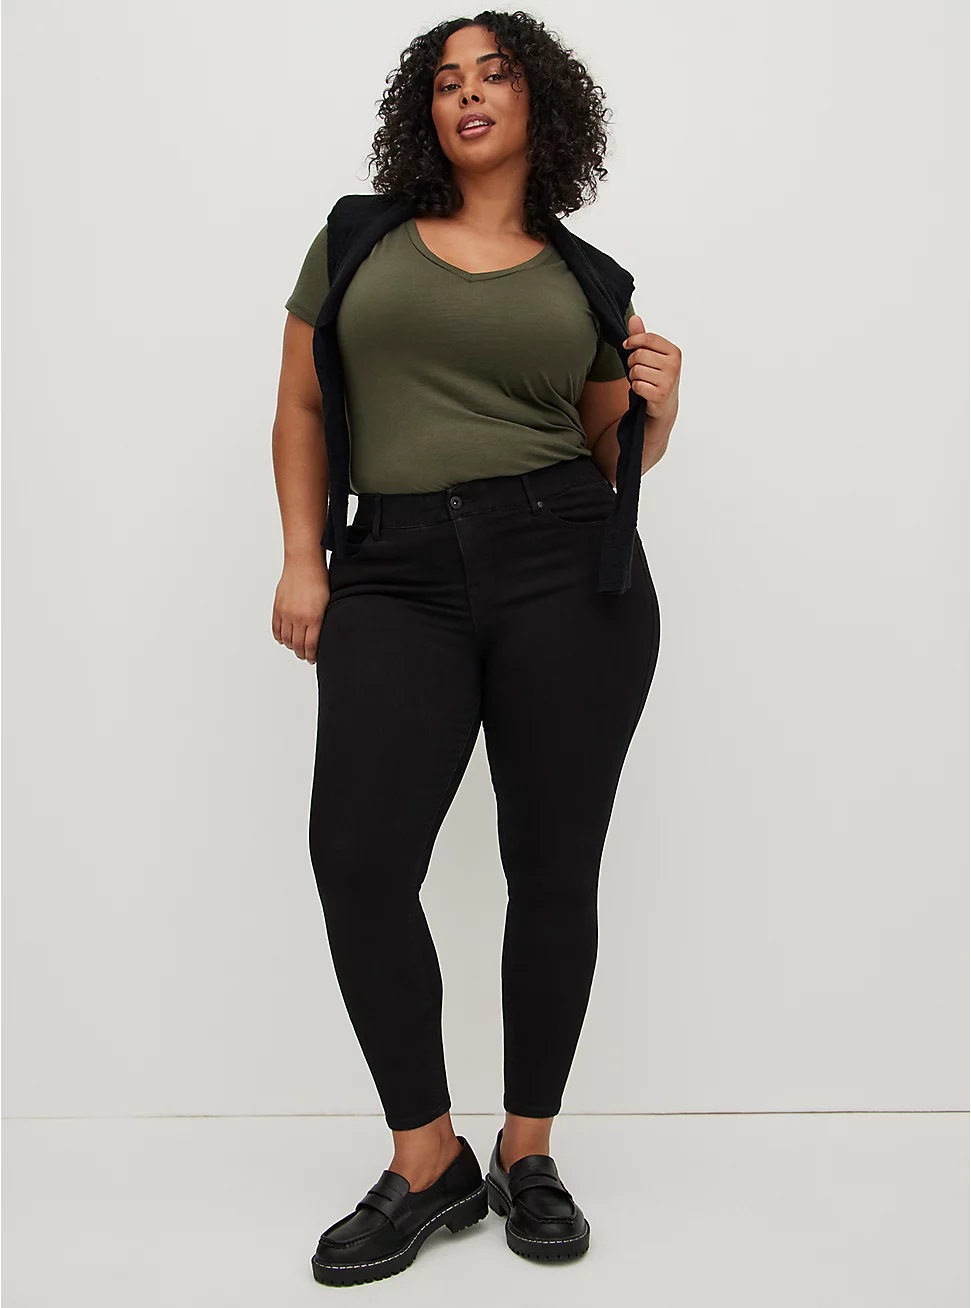 9 Best Plus-Size Jeans According to ...